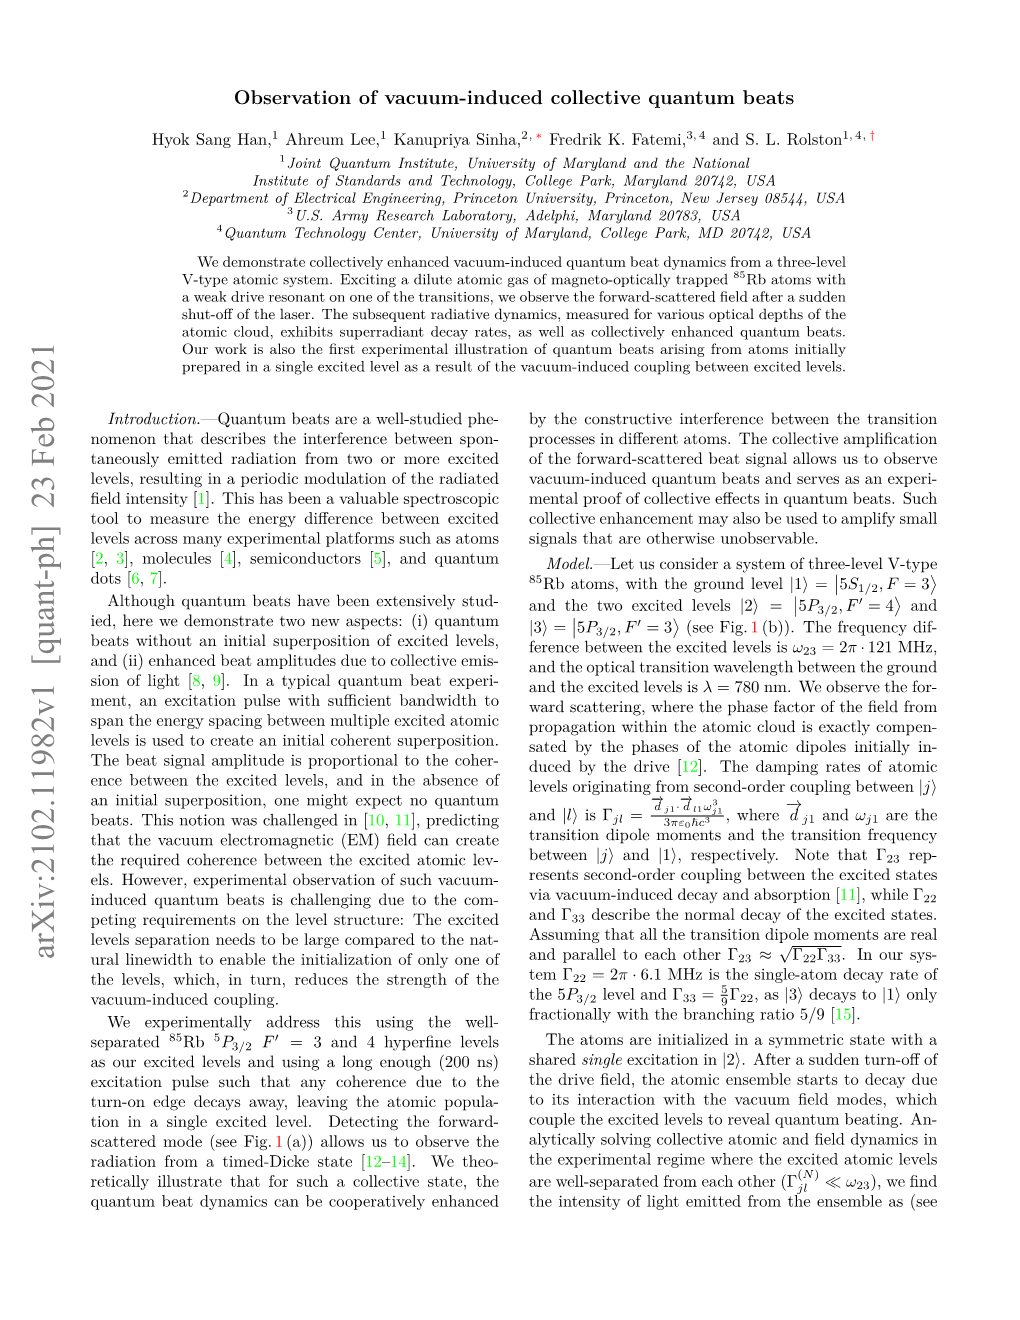 Arxiv:2102.11982V1 [Quant-Ph] 23 Feb 2021 Ural Linewidth to Enable the Initialization of Only One of and Parallel to Each Other Γ23 ≈ Γ22Γ33